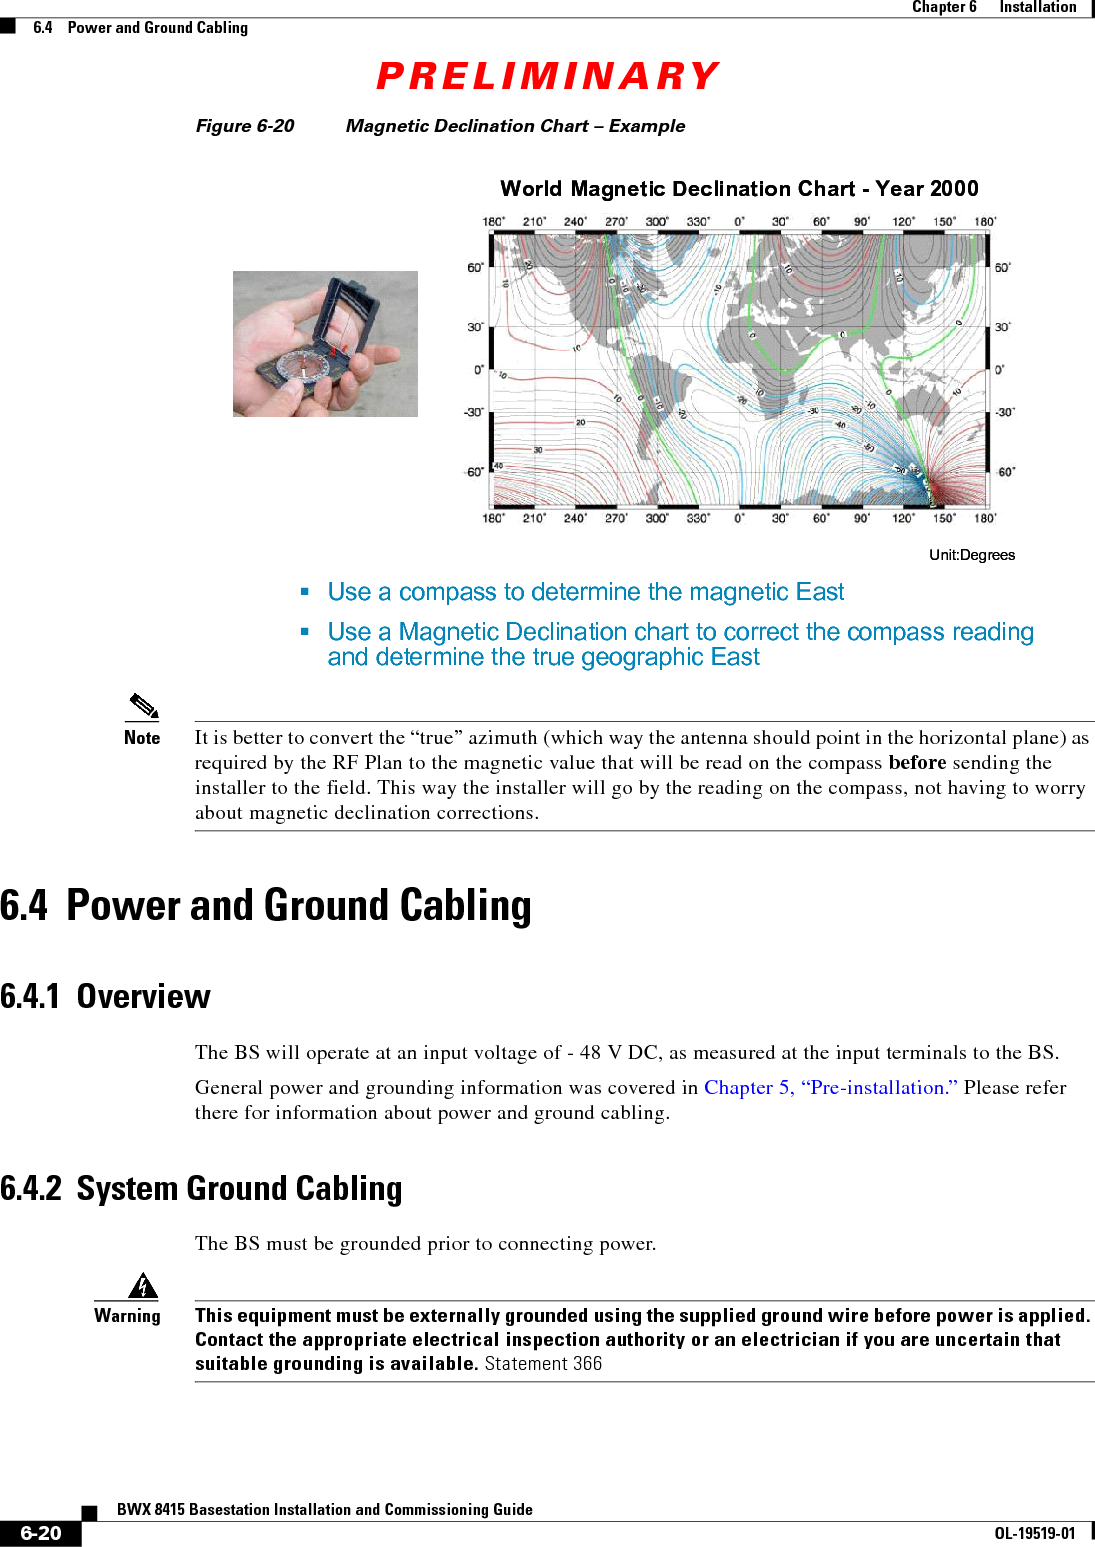 PRELIMINARY6-20BWX 8415 Basestation Installation and Commissioning GuideOL-19519-01Chapter 6      Installation6.4    Power and Ground CablingFigure 6-20 Magnetic Declination Chart – ExampleNote It is better to convert the “true” azimuth (which way the antenna should point in the horizontal plane) as required by the RF Plan to the magnetic value that will be read on the compass before sending the installer to the field. This way the installer will go by the reading on the compass, not having to worry about magnetic declination corrections.6.4  Power and Ground Cabling6.4.1  OverviewThe BS will operate at an input voltage of - 48 V DC, as measured at the input terminals to the BS.General power and grounding information was covered in Chapter 5, “Pre-installation.” Please refer there for information about power and ground cabling.6.4.2  System Ground CablingThe BS must be grounded prior to connecting power.WarningThis equipment must be externally grounded using the supplied ground wire before power is applied. Contact the appropriate electrical inspection authority or an electrician if you are uncertain that suitable grounding is available. Statement 366 Use a compass to determine the magnetic EastUse a Magnetic Declination chart to correct the compass reading and determine the true geographic EastWorld Magnetic Declination Chart - Year 2000Unit:DegreesWorld Magnetic Declination Chart - Year 2000Unit:Degrees